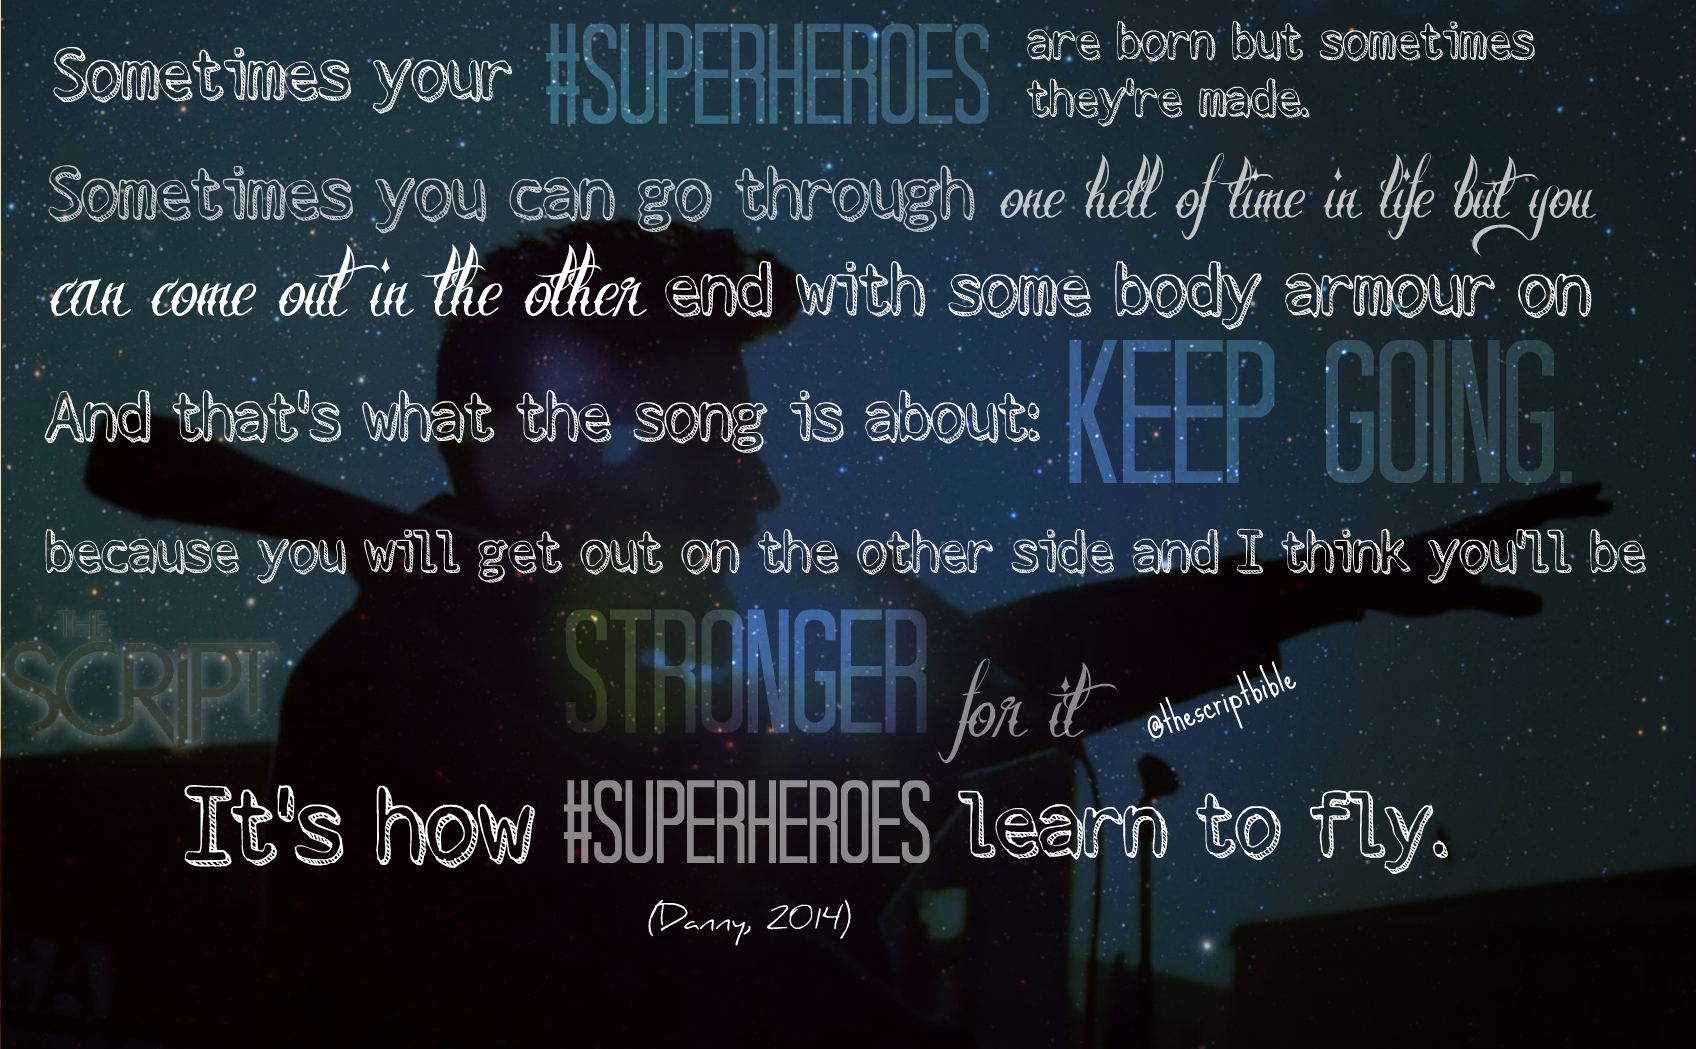 Superheroes - song and lyrics by The Script